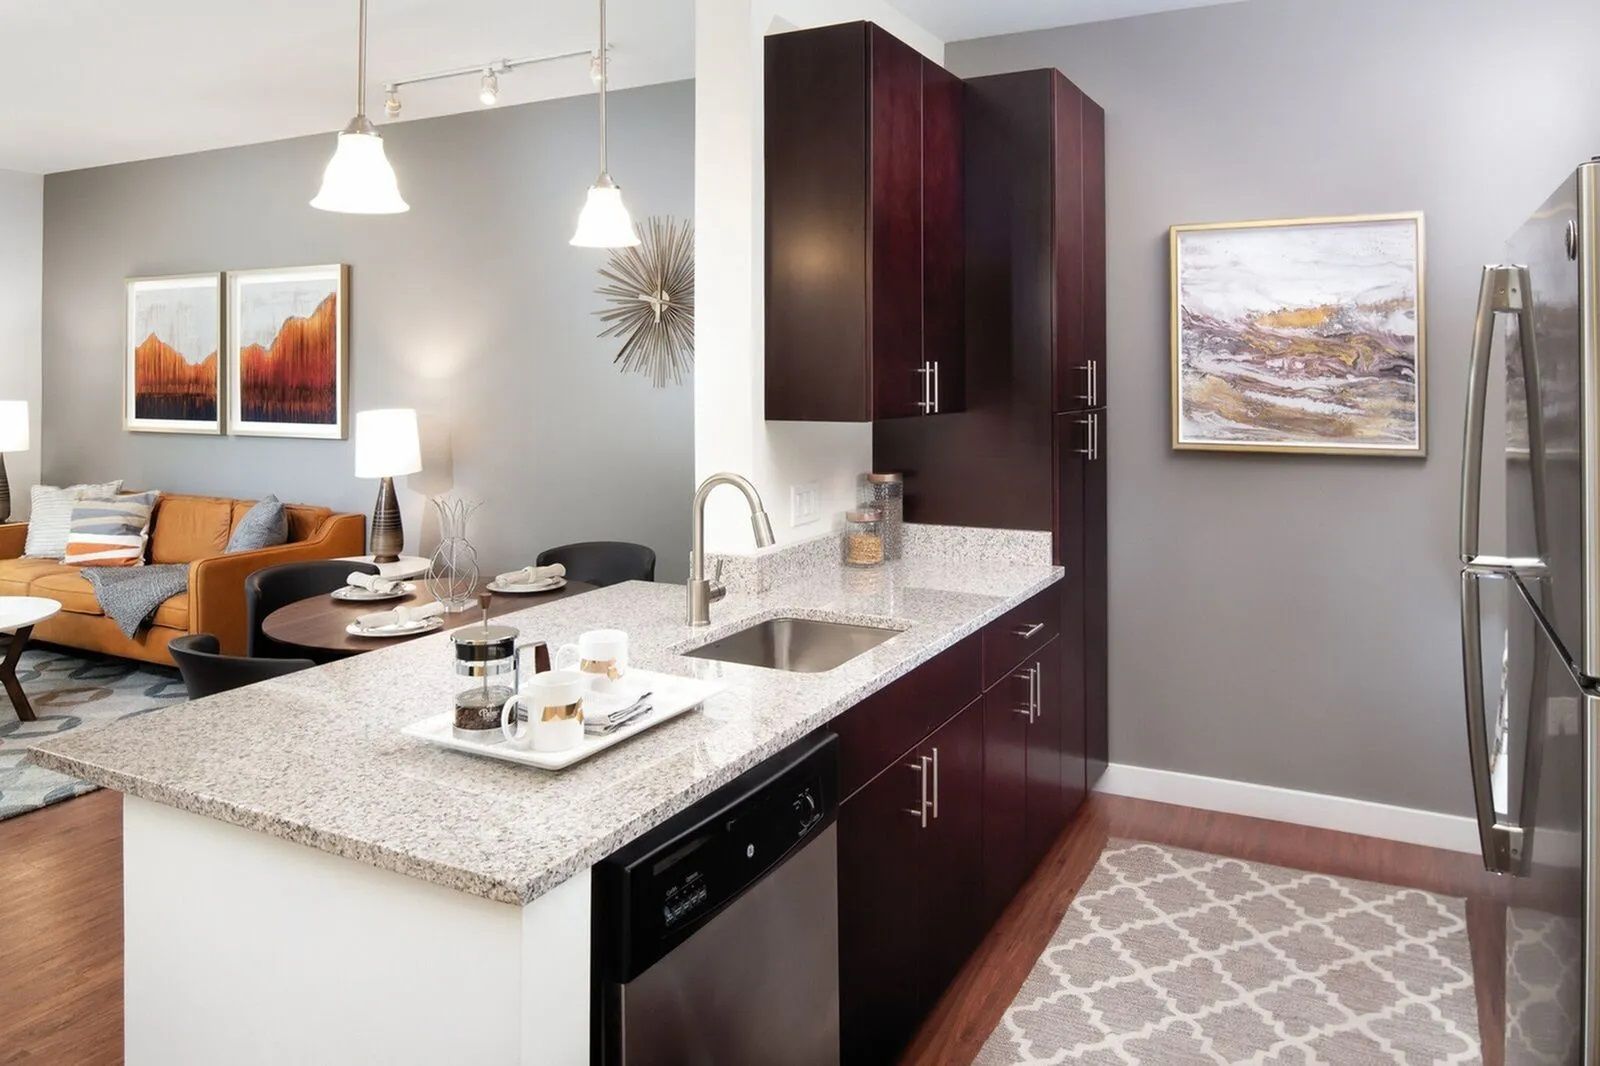 The Residences At Great Pond modern kitchen.